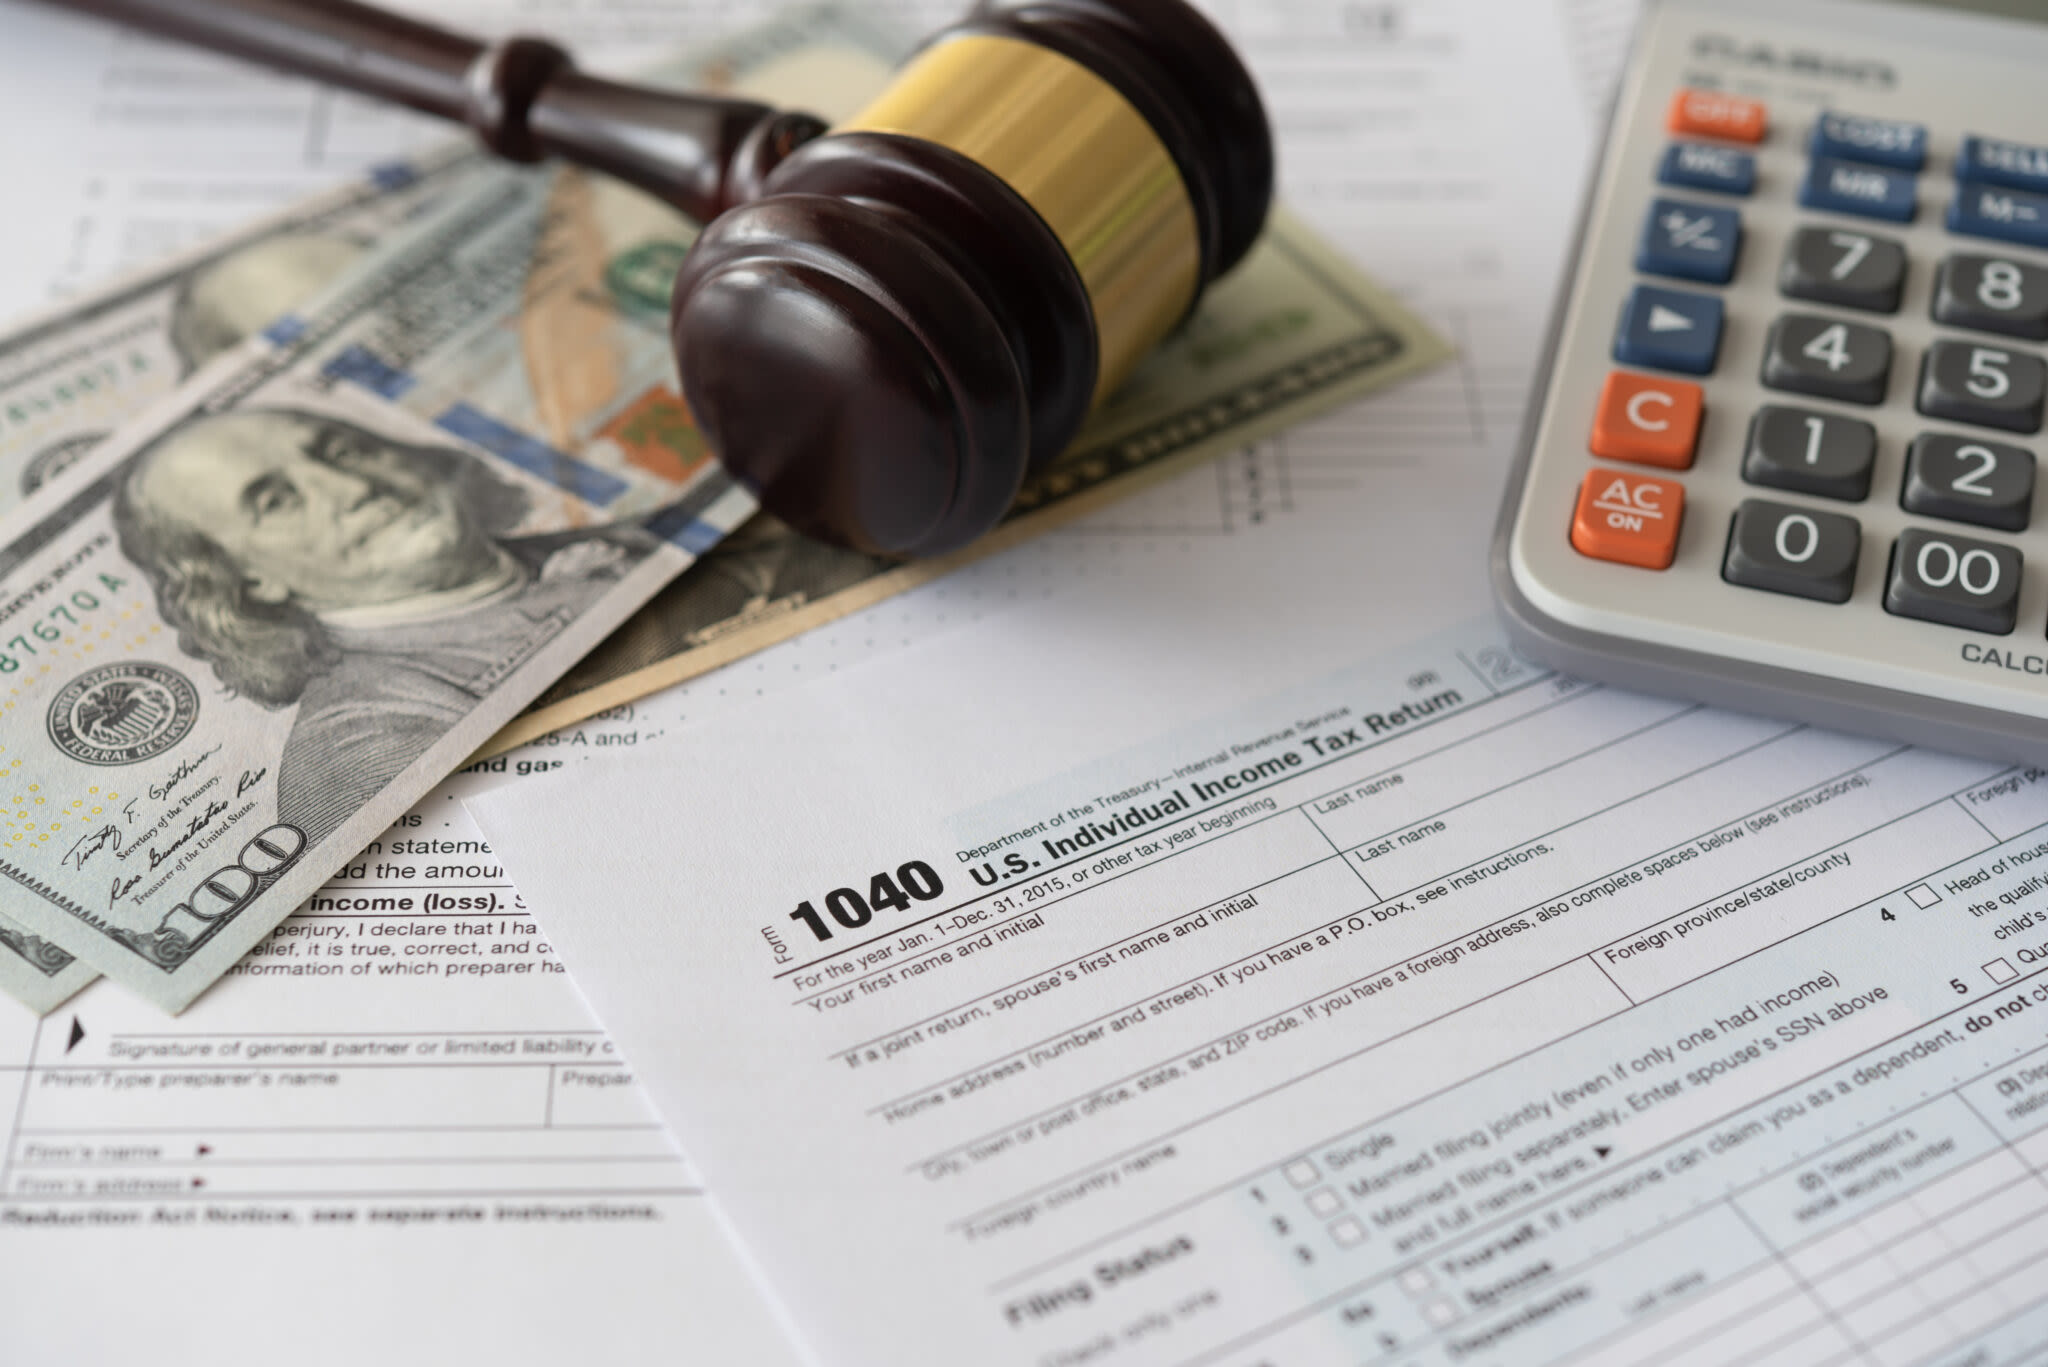 Ohio trucking company owner accused of evading $1.2M in taxes